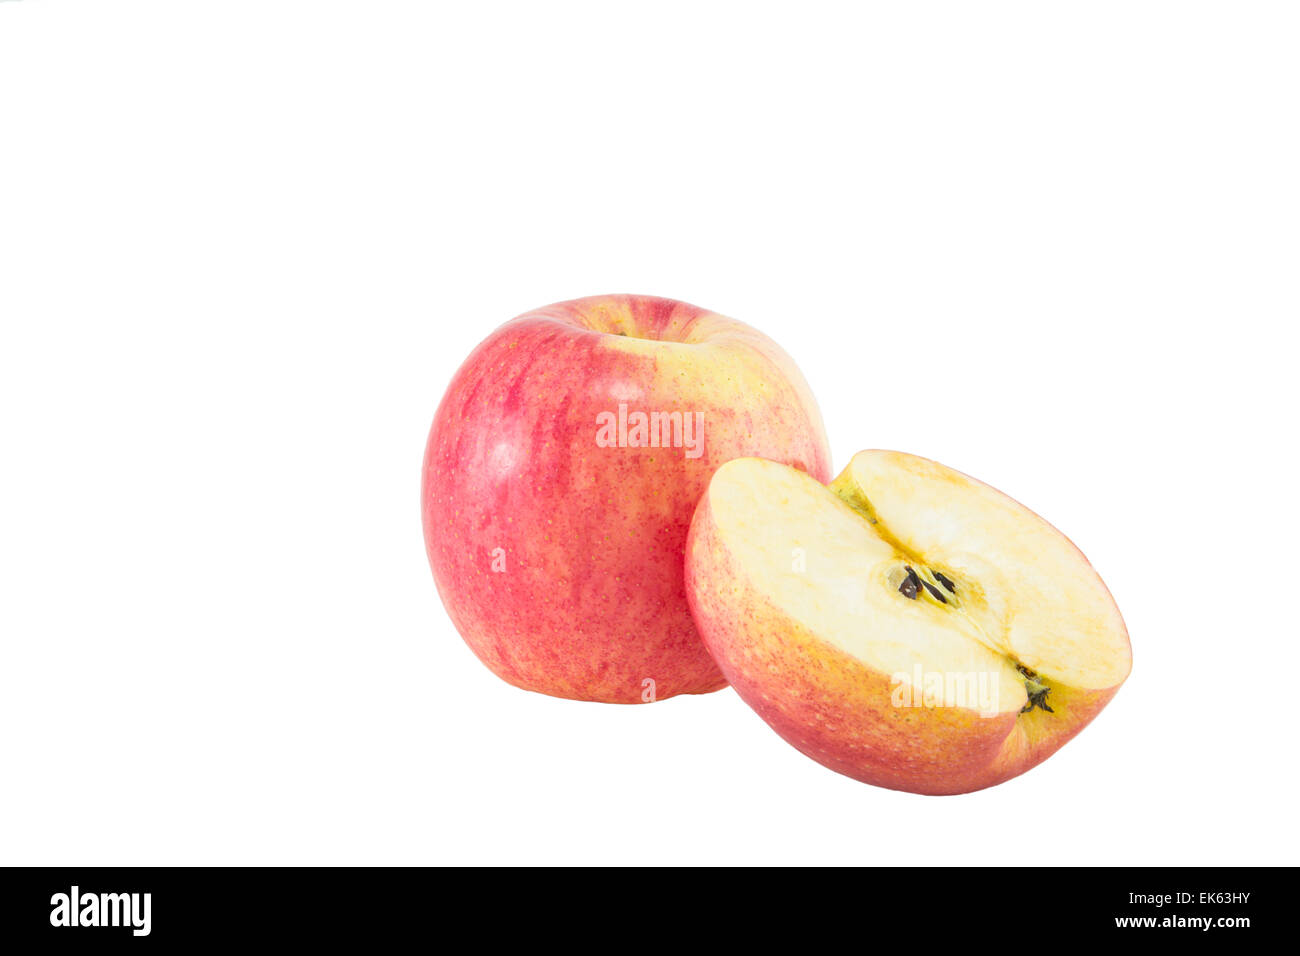 Apple is cutting out the area to eat. On a white background Stock Photo